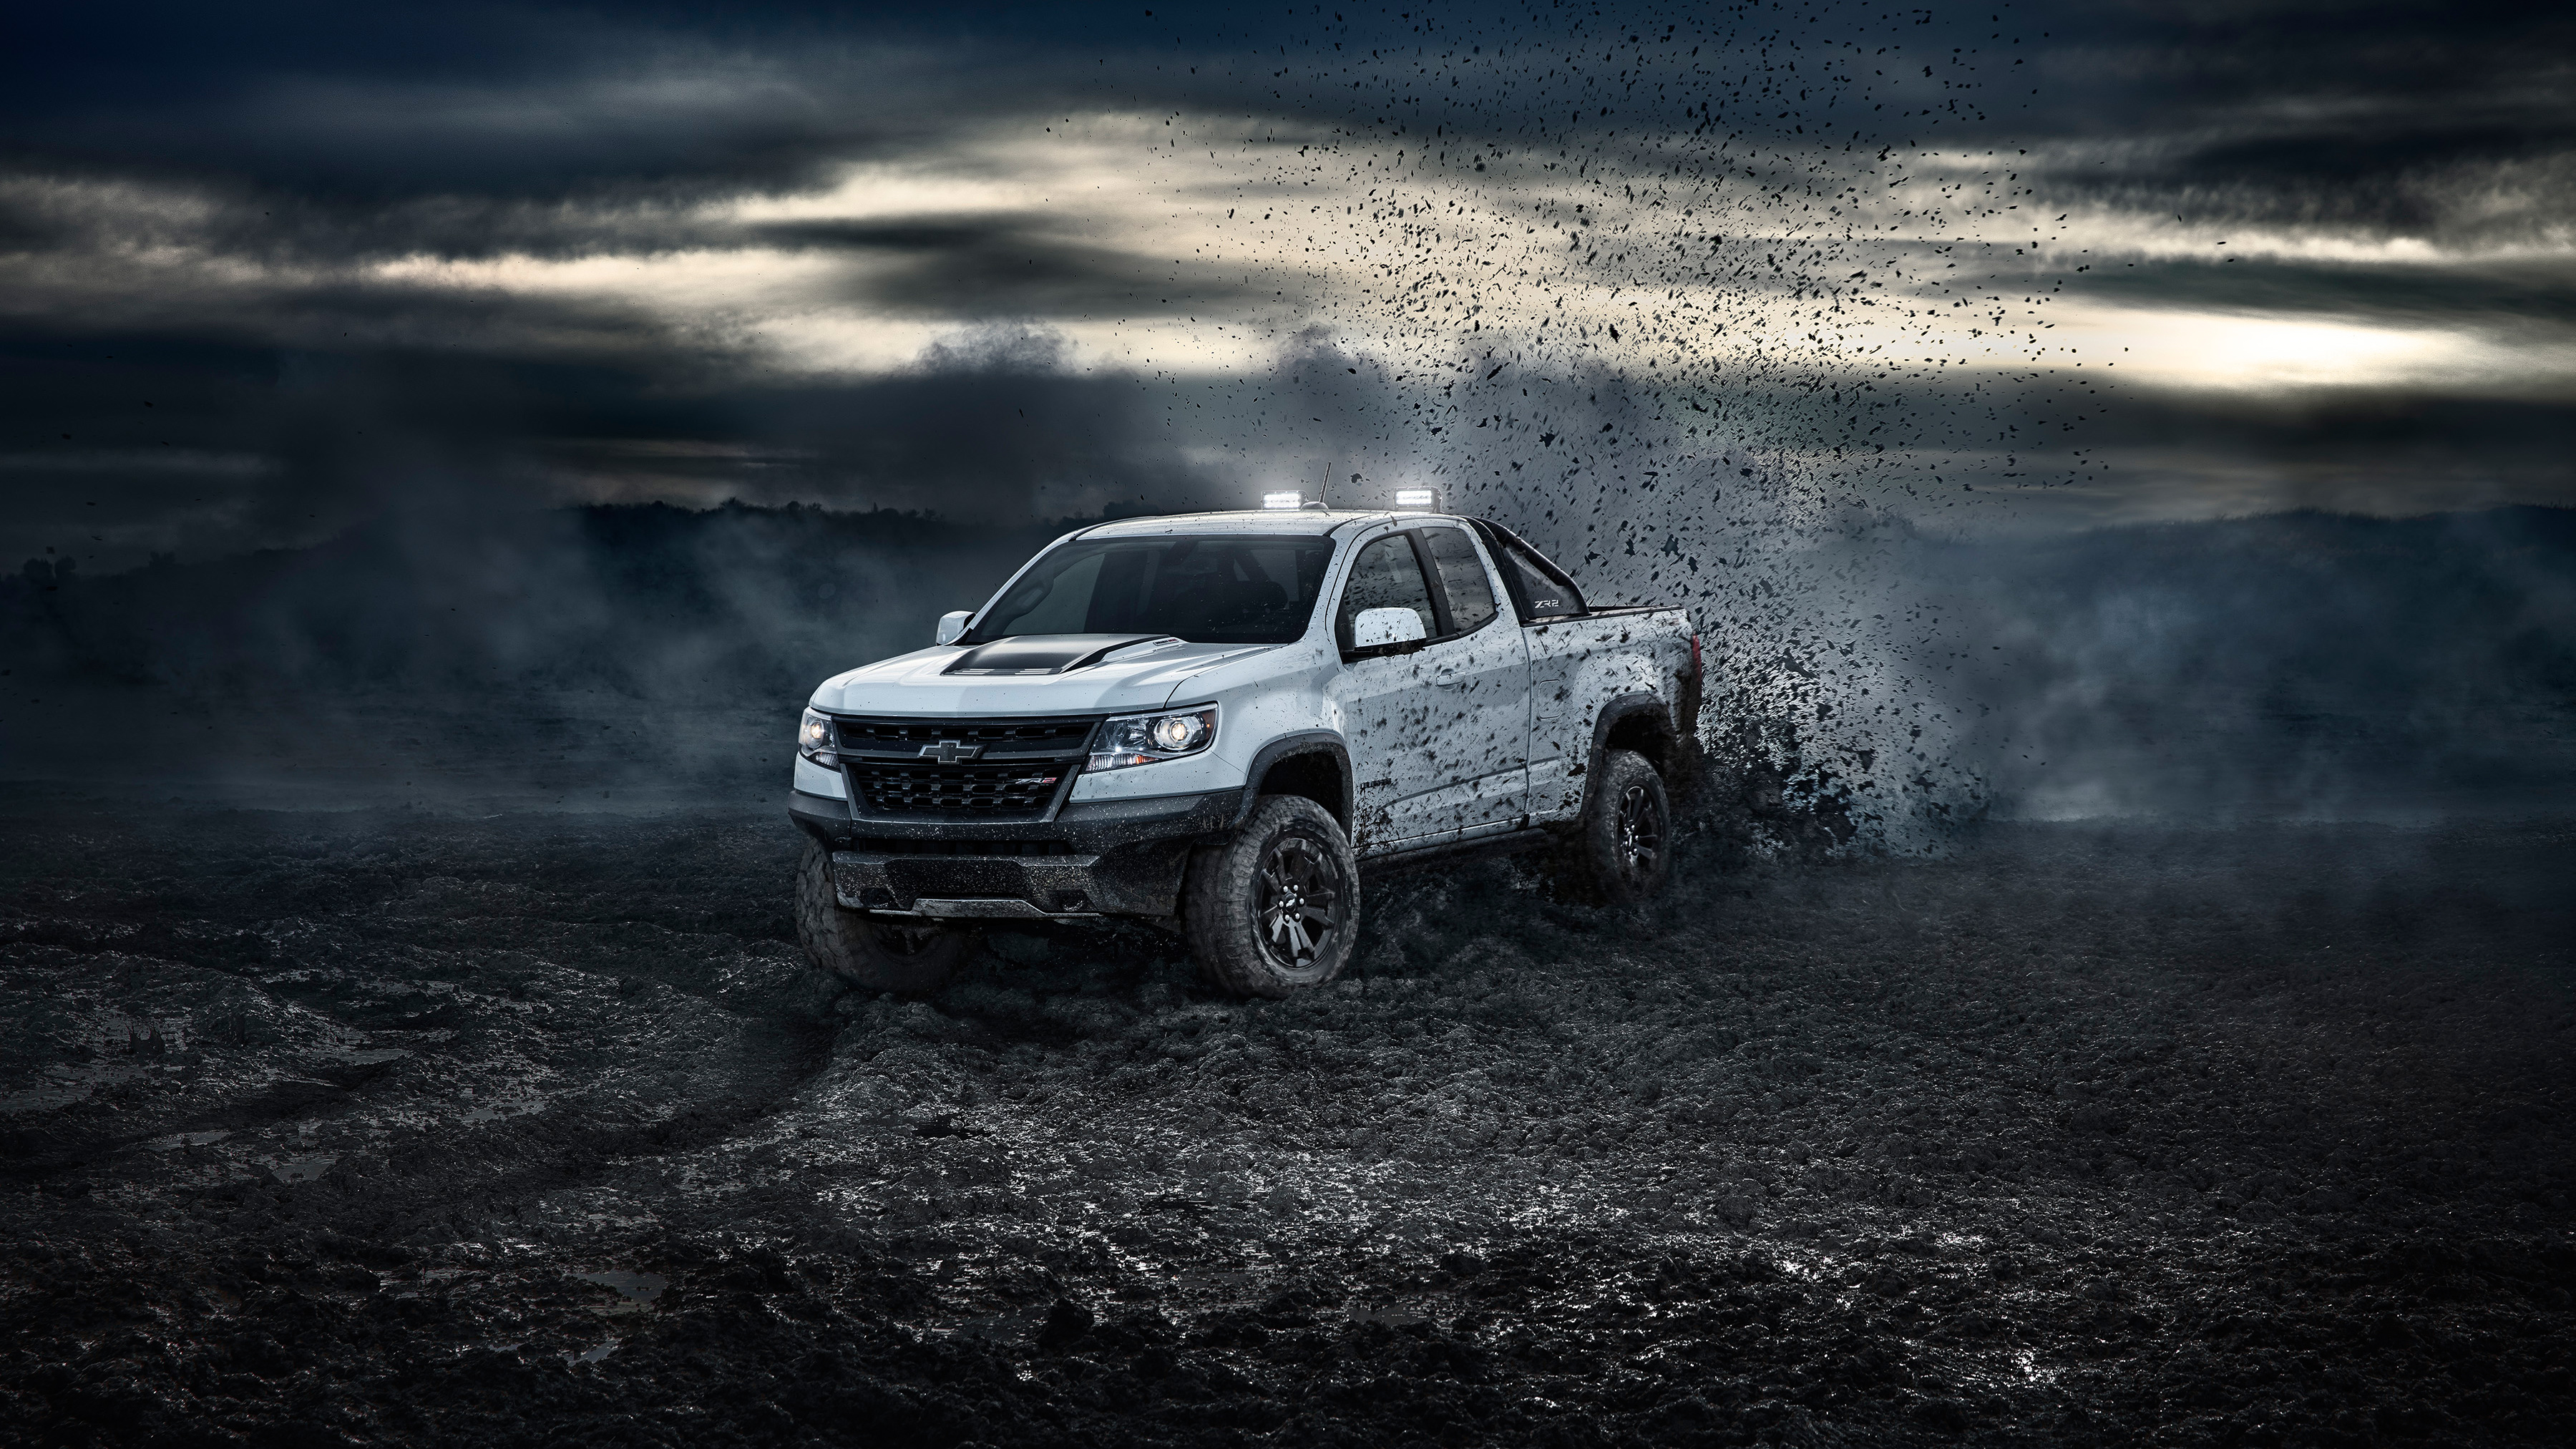 Chevrolet Colorado Wallpapers and Background Images   stmednet